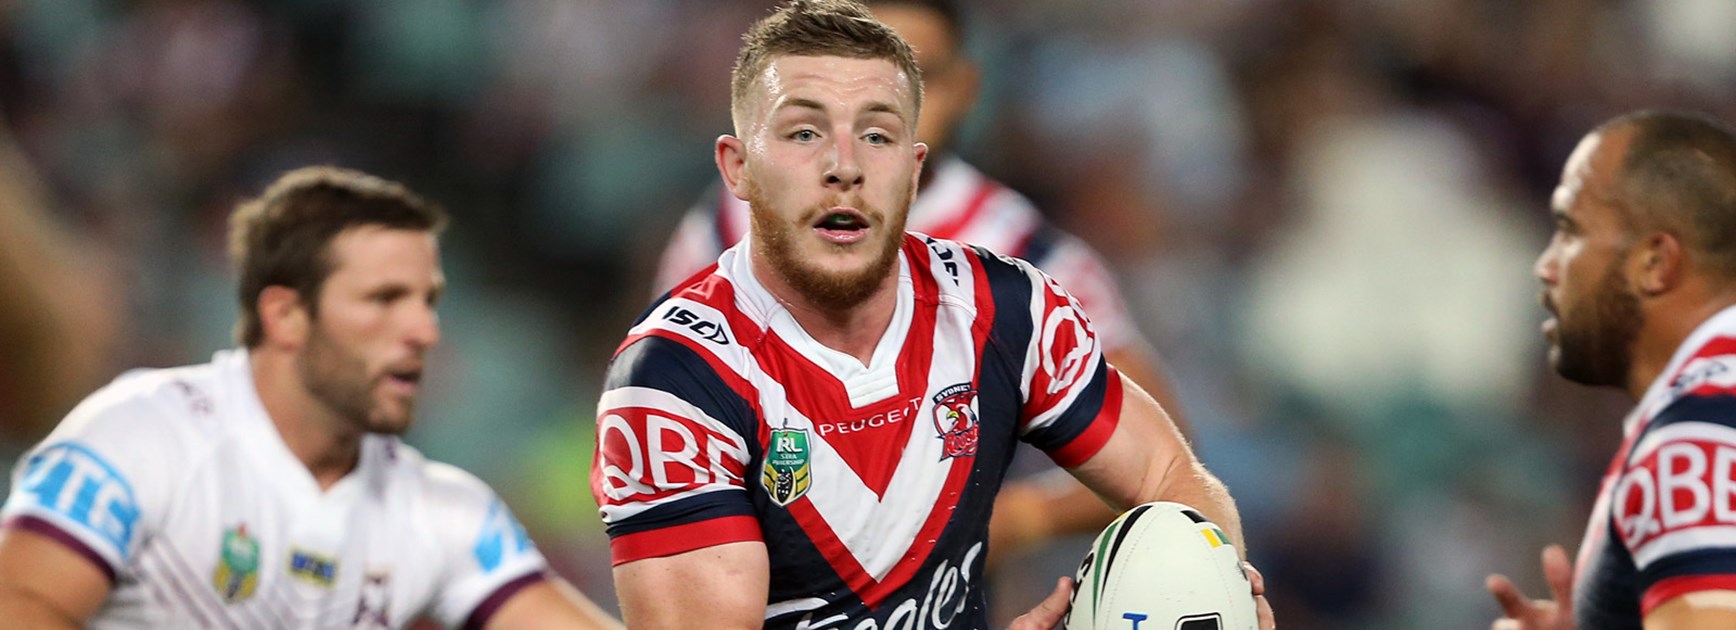 Roosters halfback Jackson Hastings was impressive against Manly in Round 4.